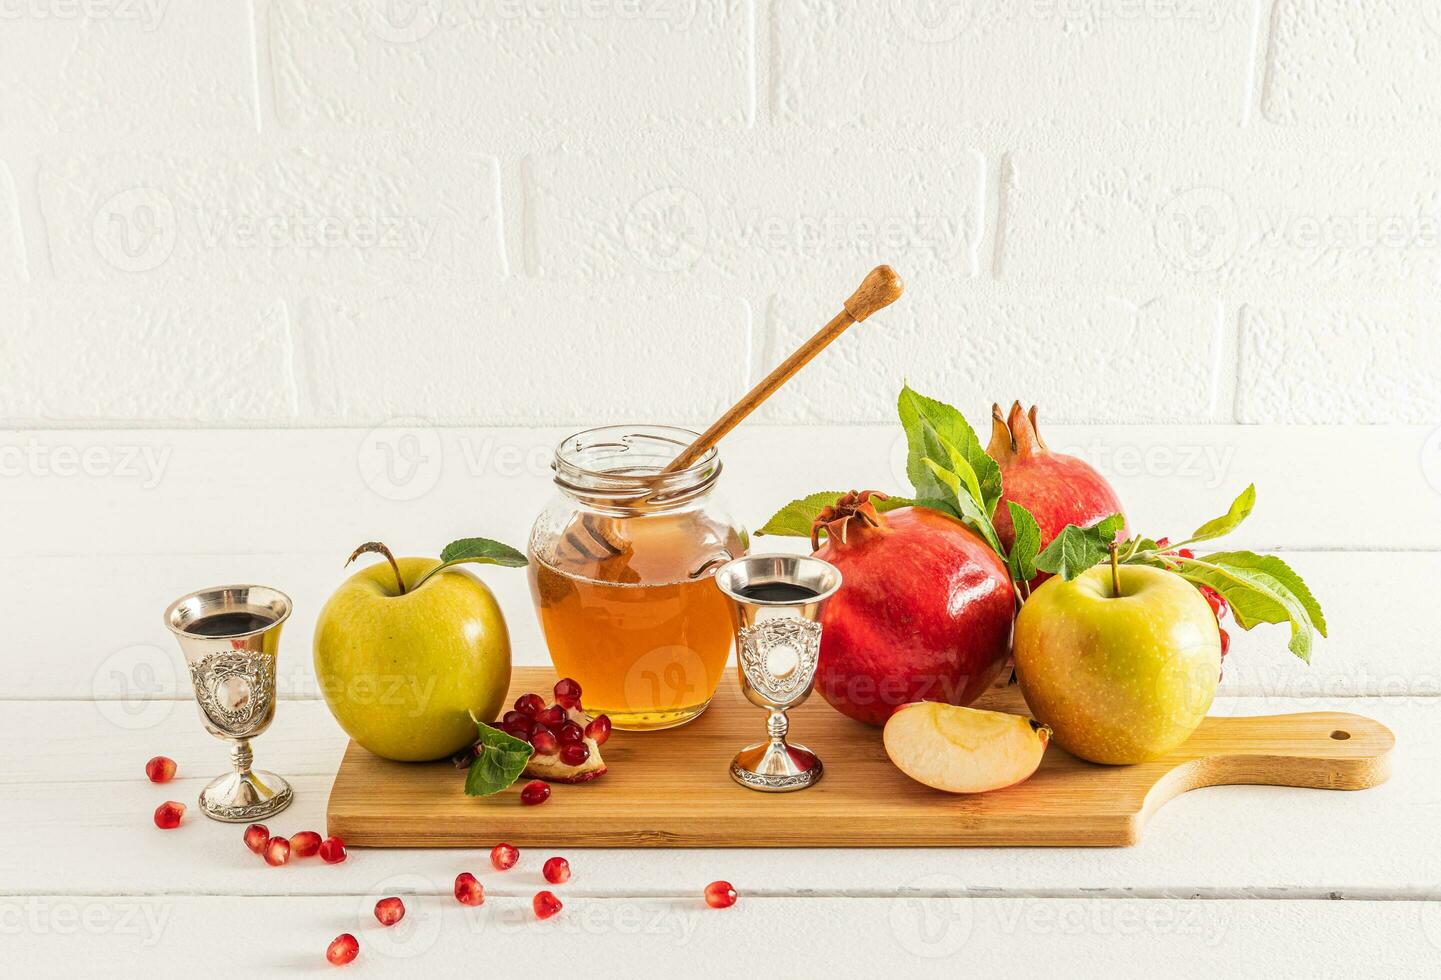 A jar of honey and spindle on a wooden board with ripe fruits, pomegranates and apples. traditional food for the holiday of Rosh Hashanah. front view photo